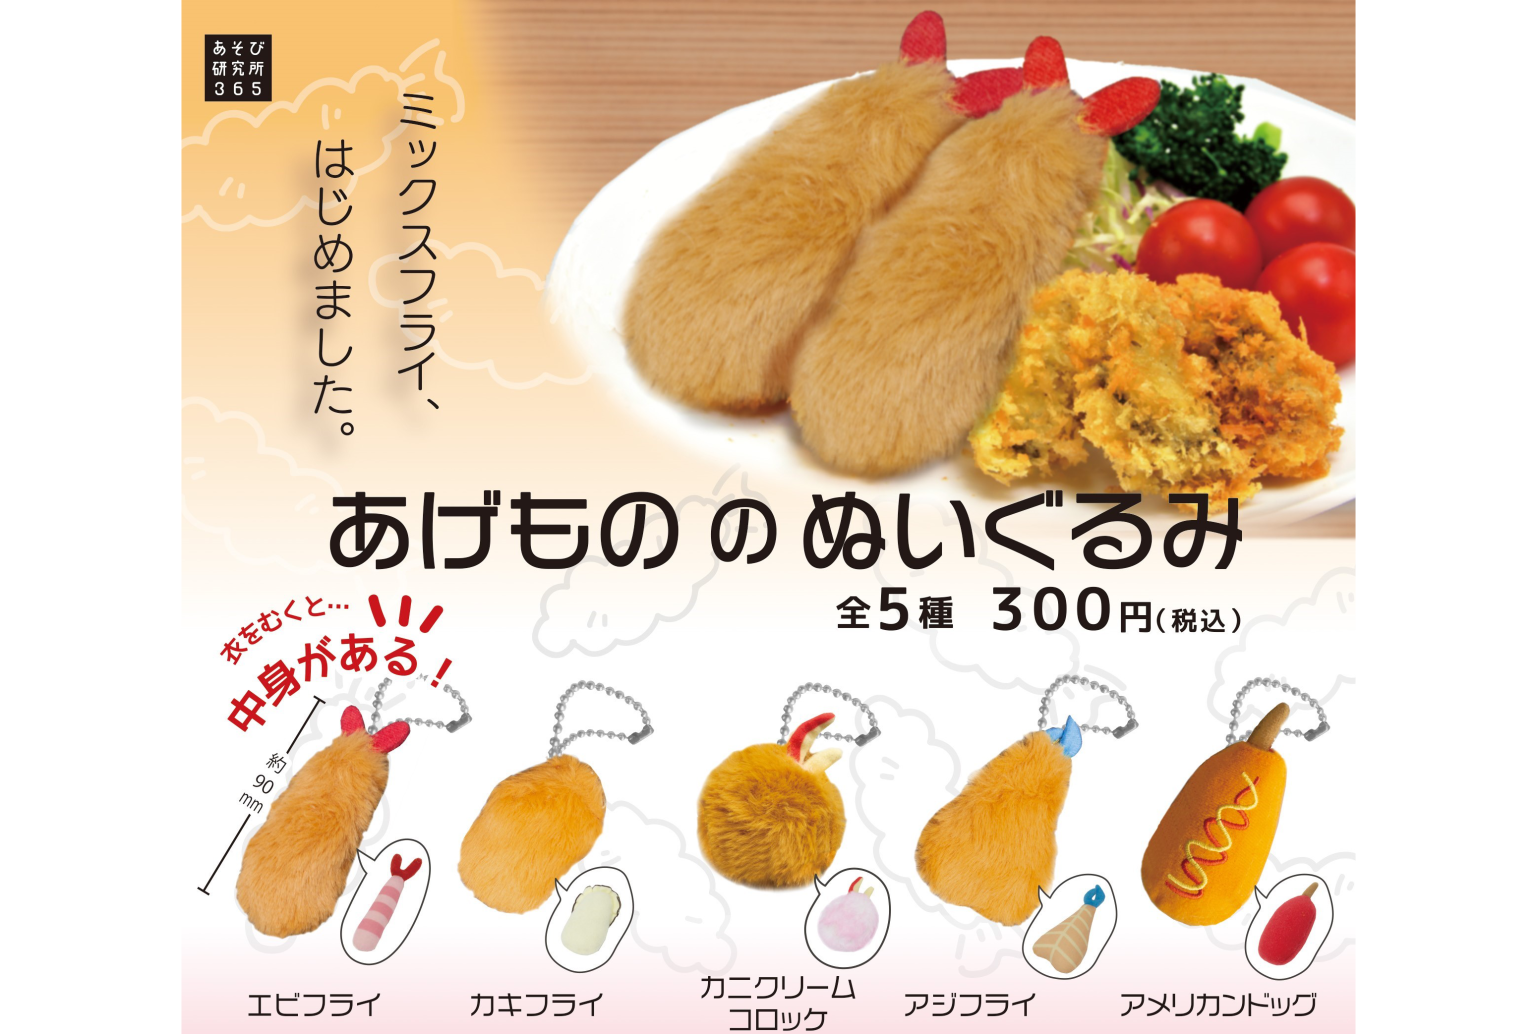 Love Japan's realistic fake food? Now you can wear it on your head as an  accessory! 【Pics】